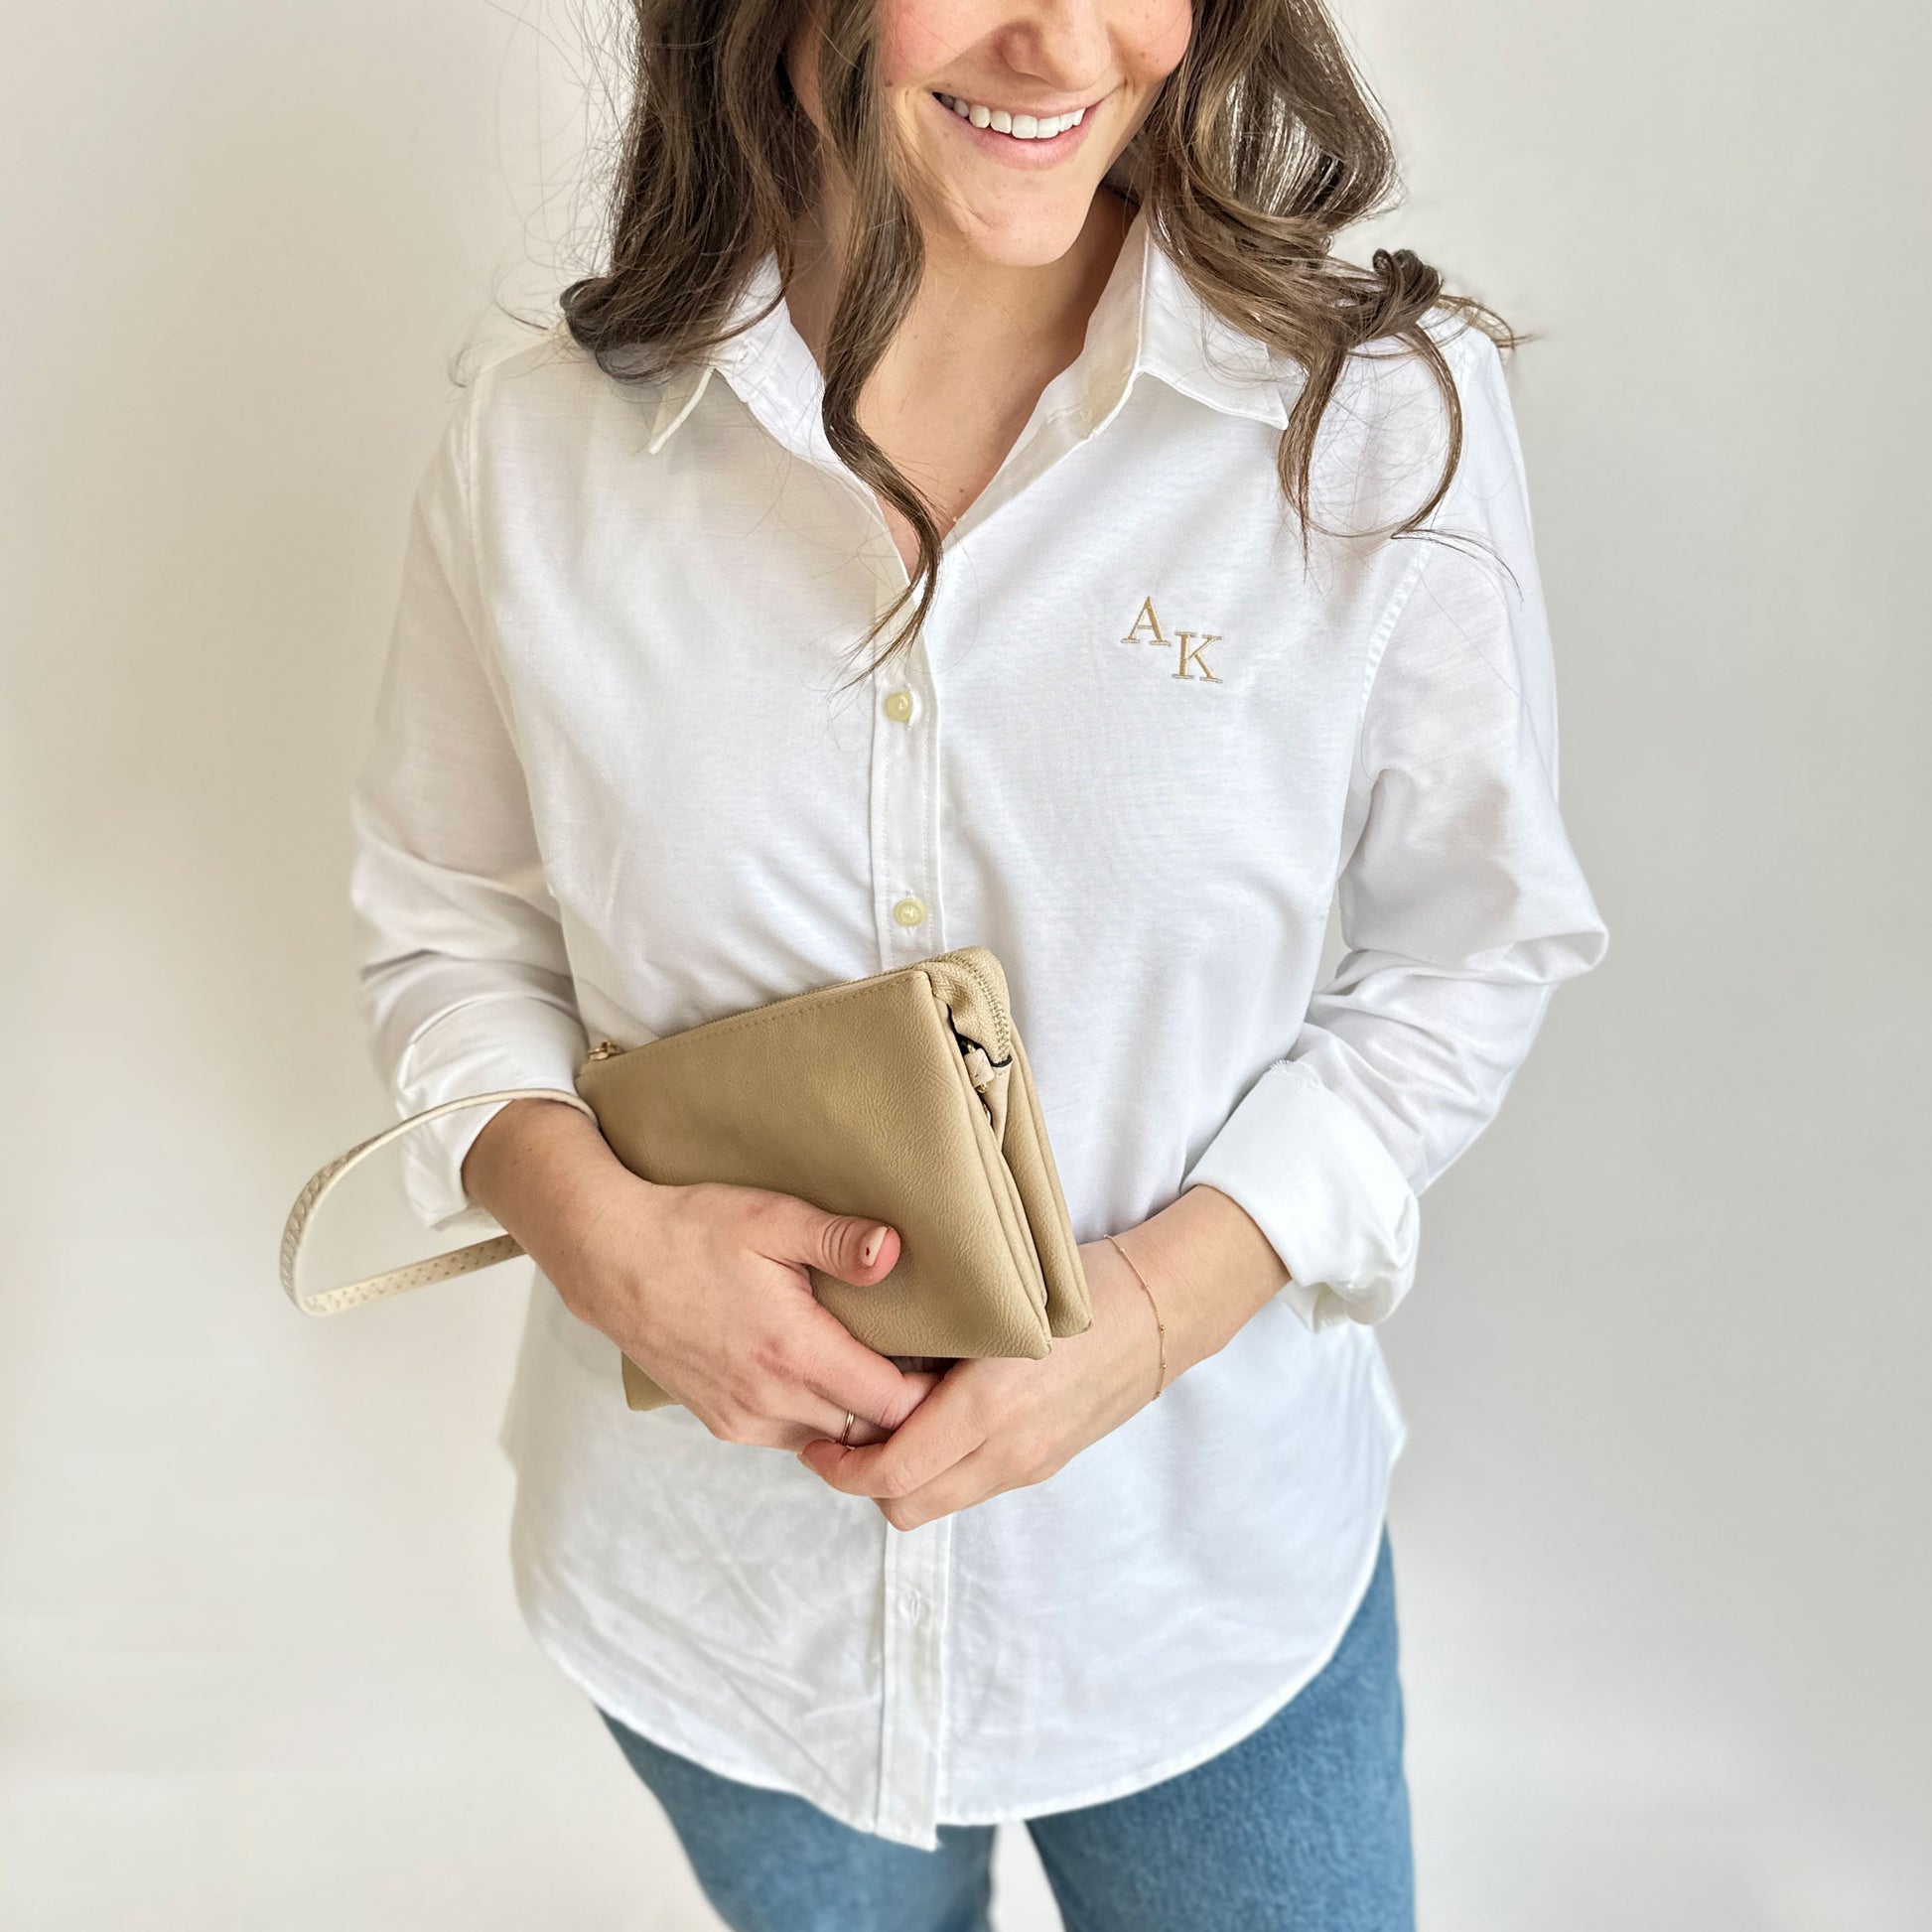 young woman wearing a white oxford button down with mini AK embroidered on the left chest in camel thread, styled with a clutch purse